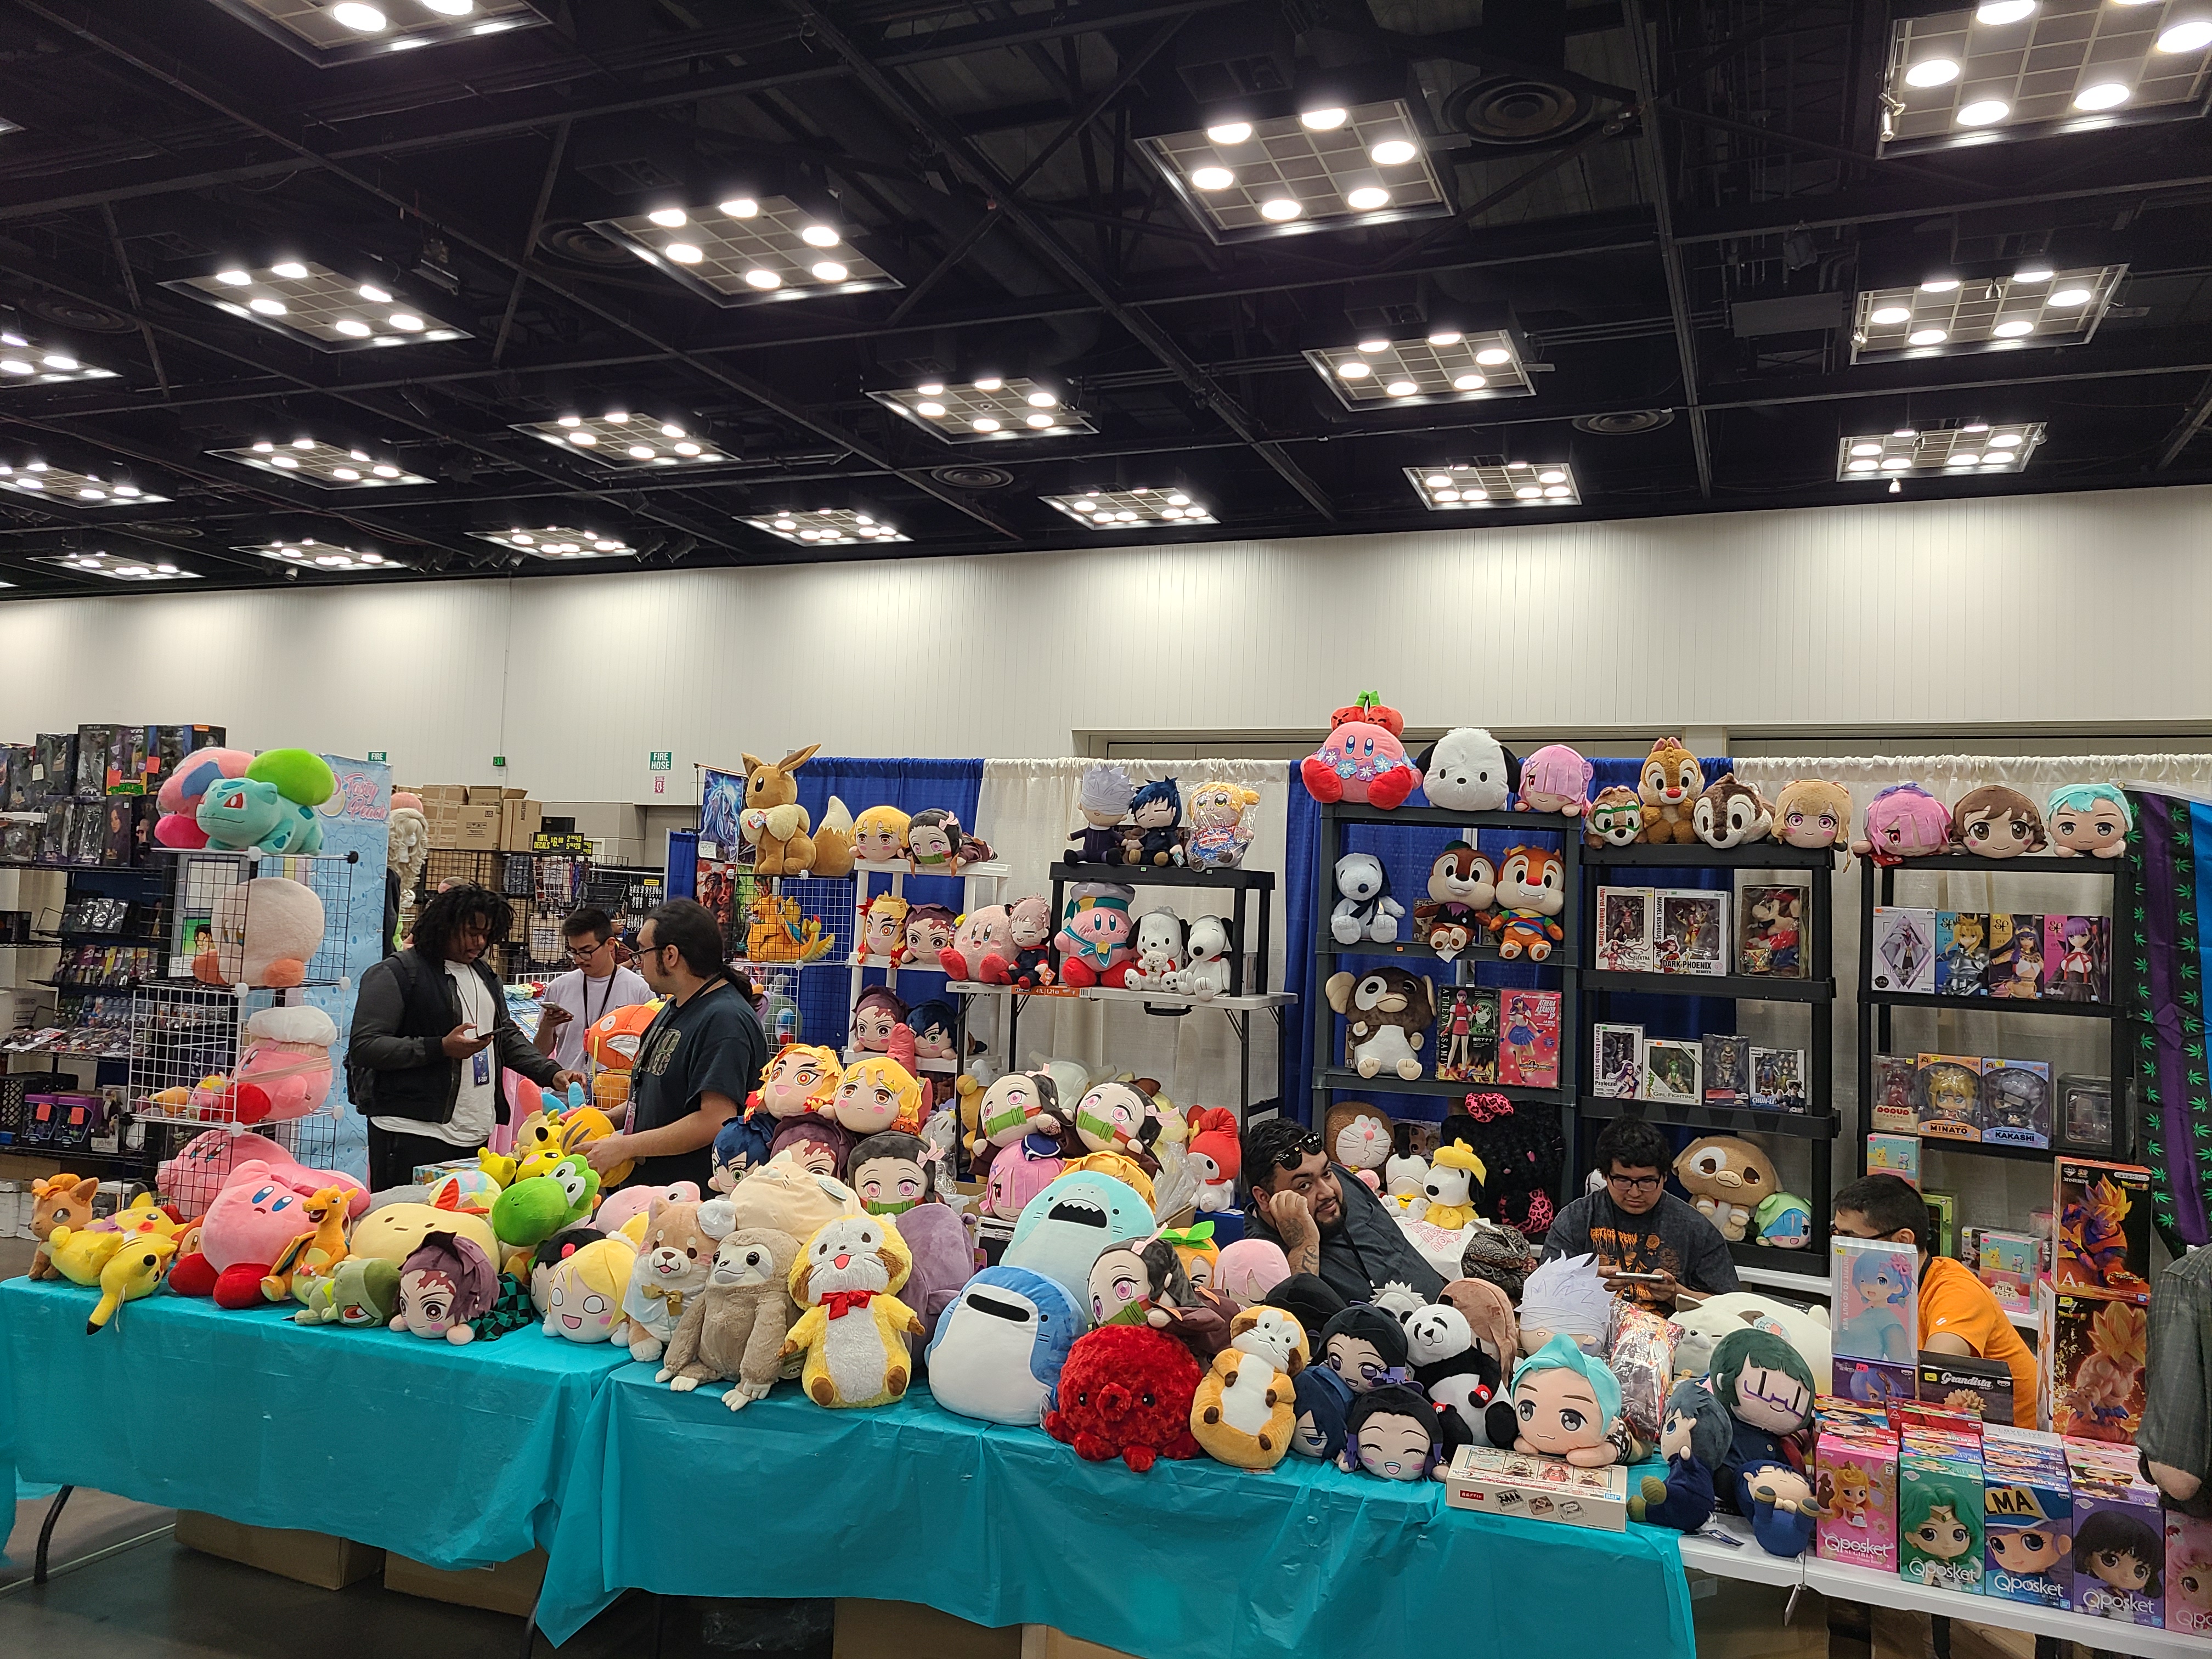 Rare Candy's booth setup with lots of authentic Japanese plushies and figures